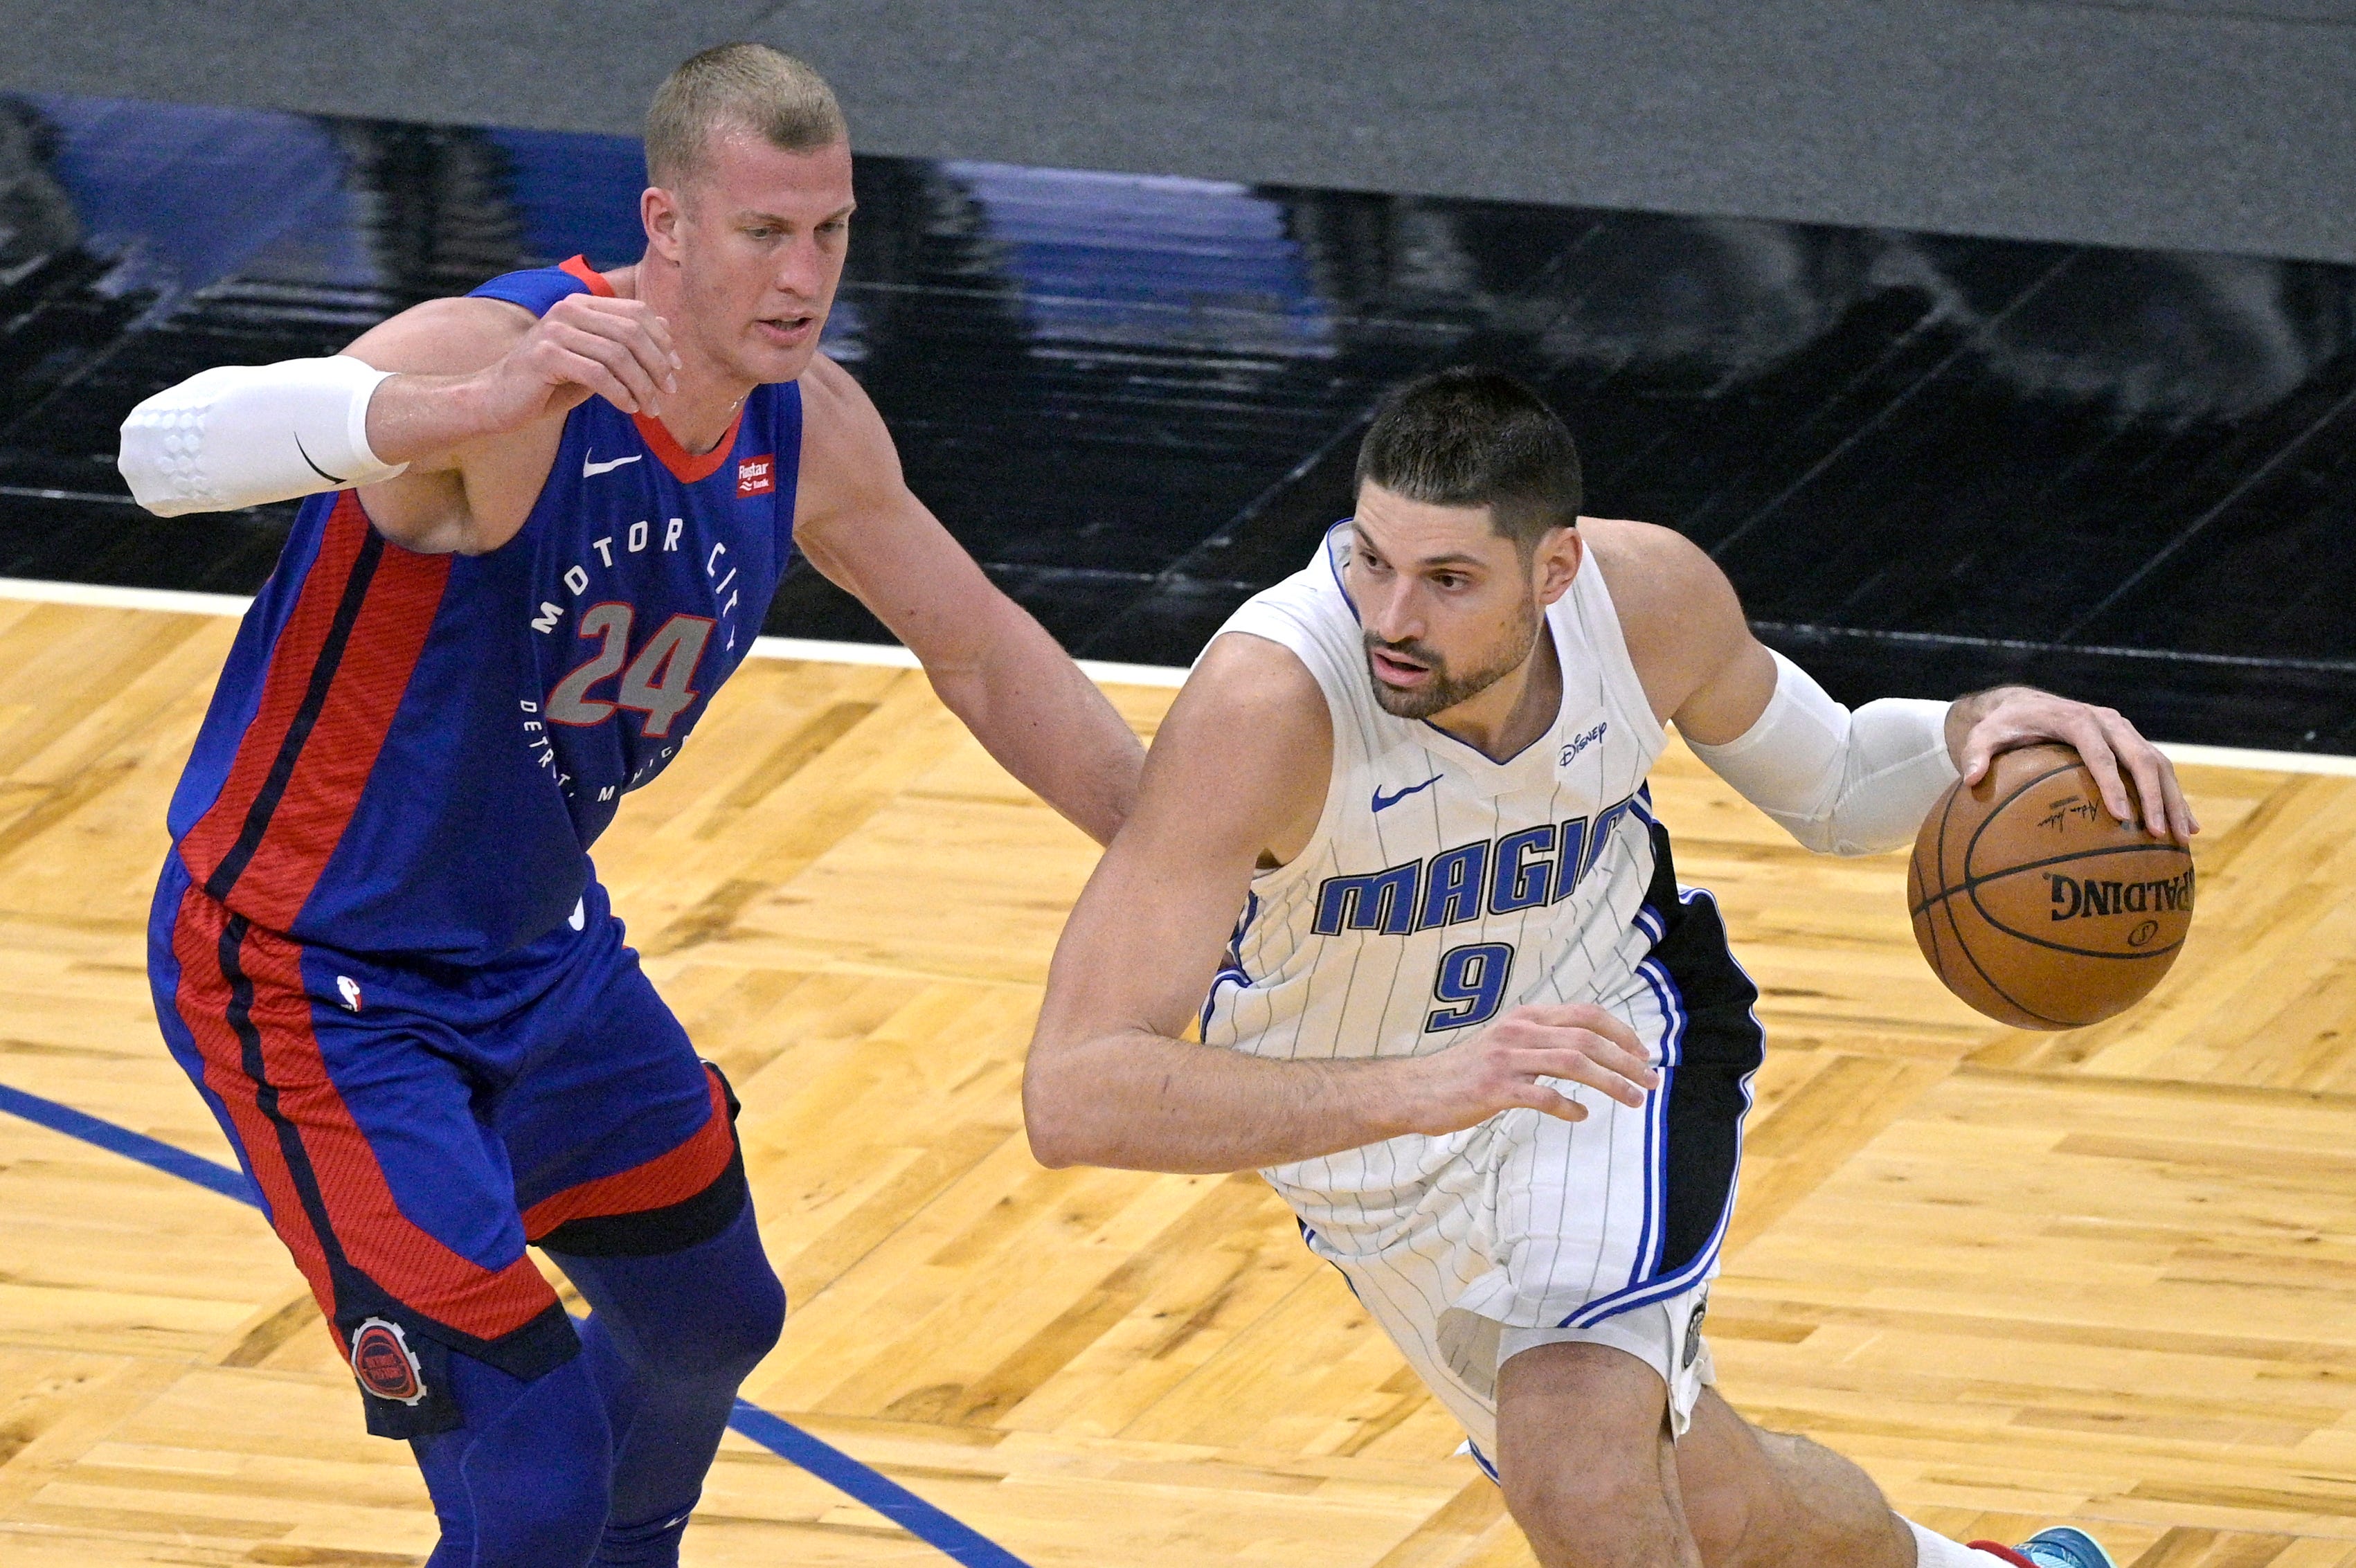 Orlando Magic center Nikola Vucevic (9) drives to the basket in front of Detroit Pistons center Mason Plumlee (24) during the first half of an NBA basketball game, Tuesday, Feb. 23, 2021, in Orlando, Fla.